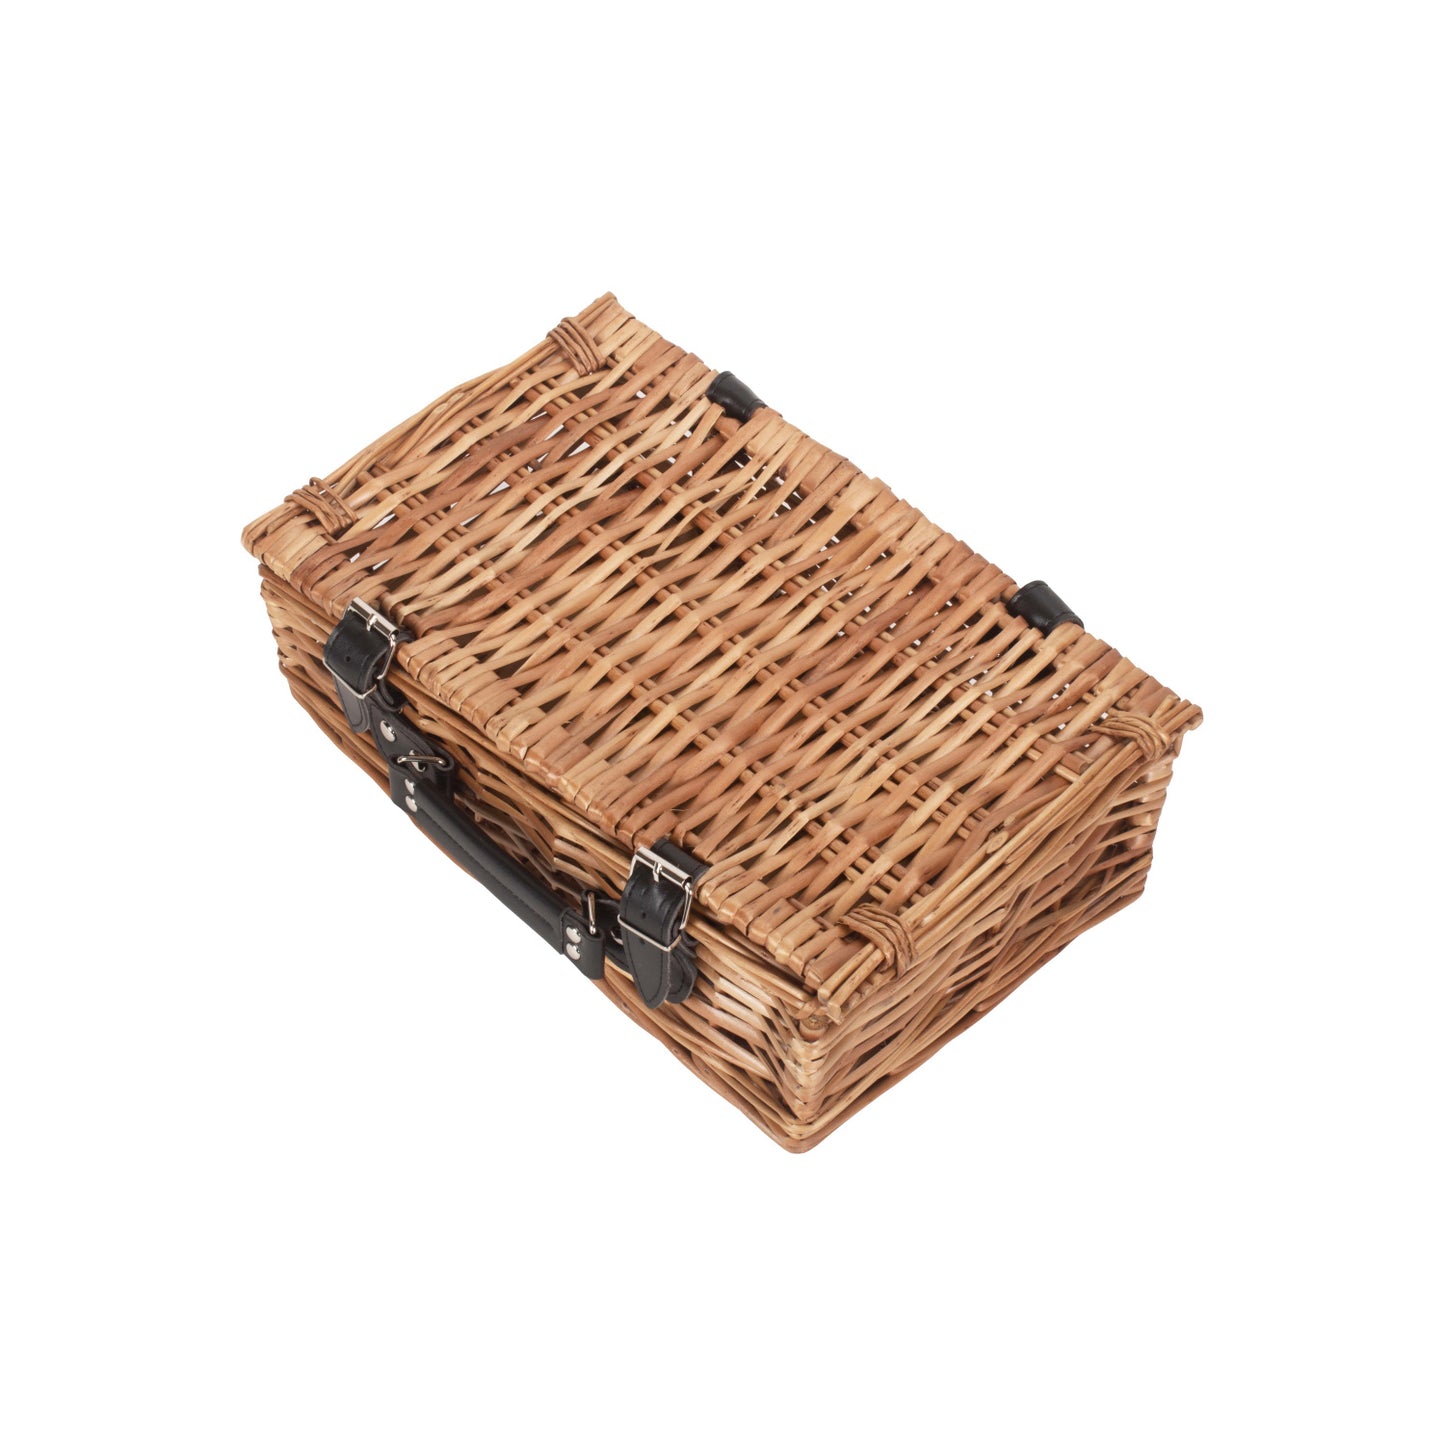 14 Inch Small Packaging Hamper